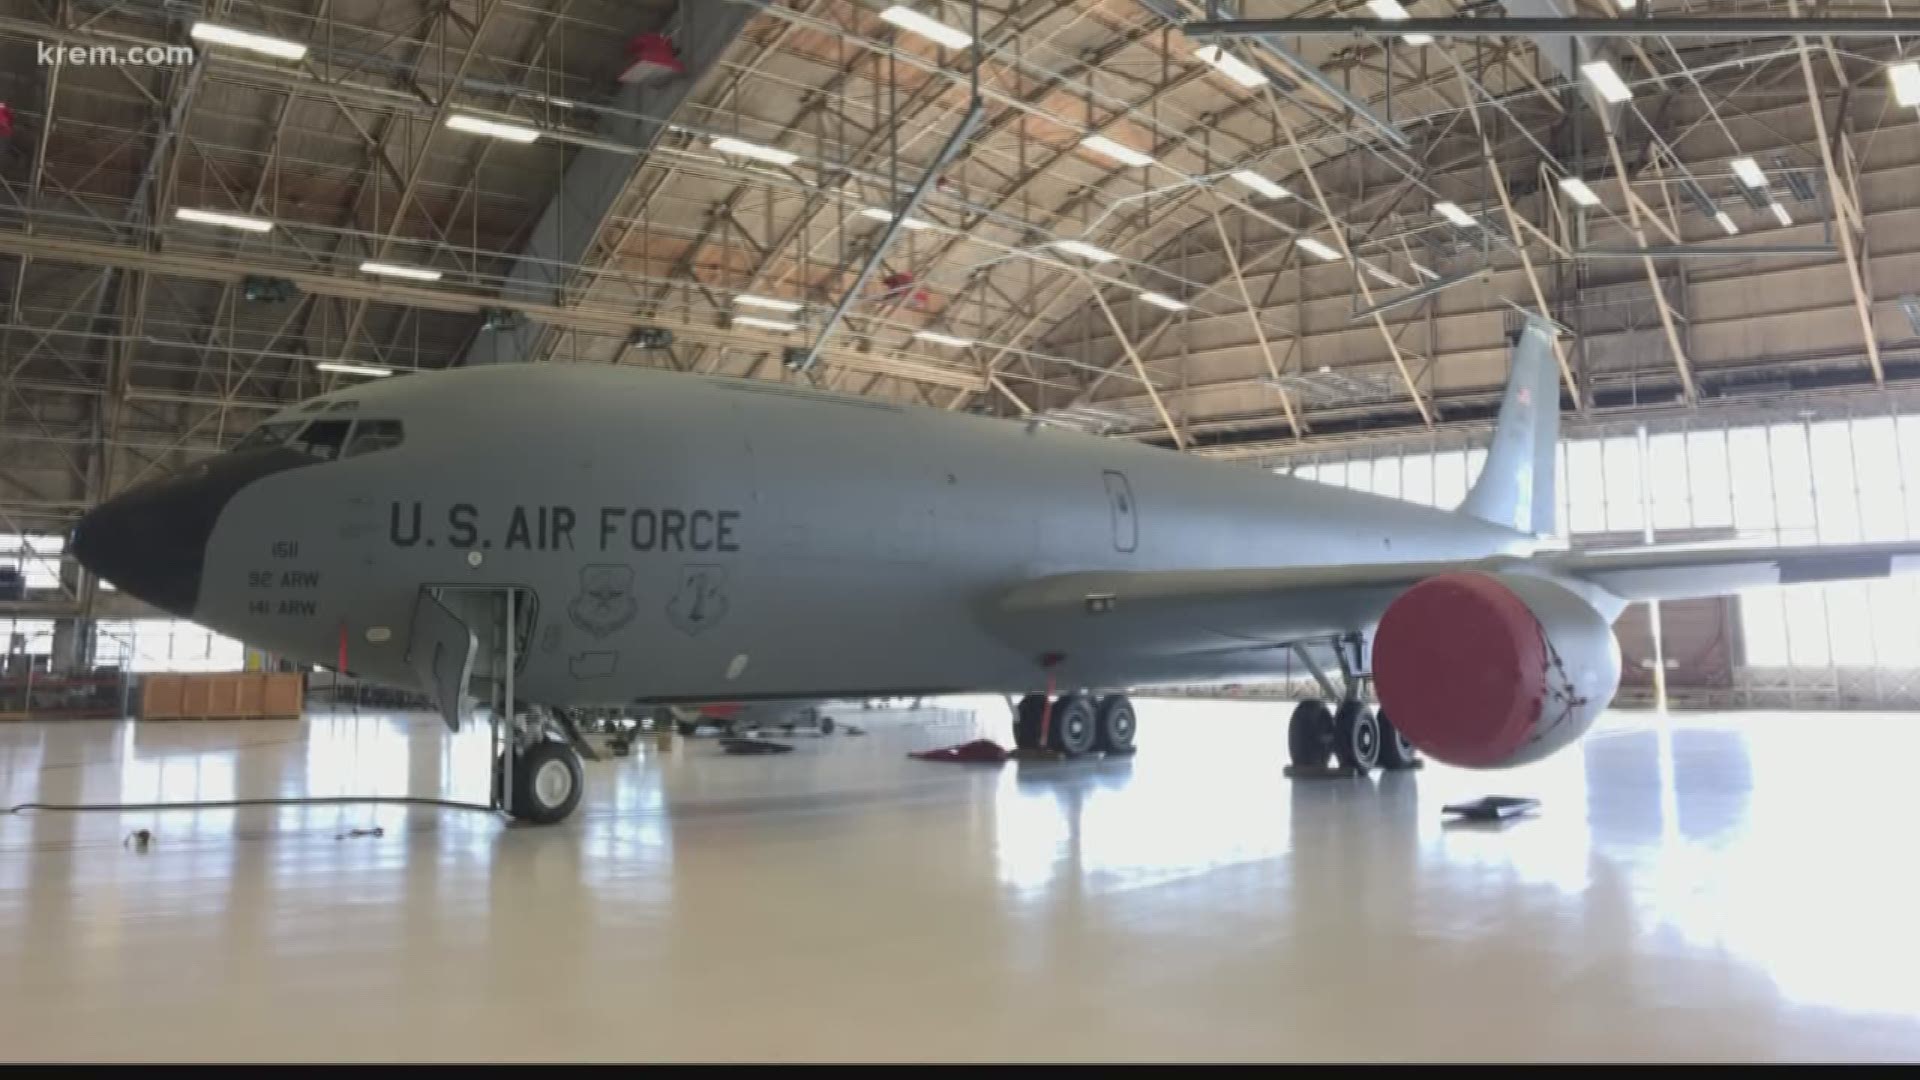 Two KC-135 Stratotankers from Fairchild Air Force Base will fly over Spokane, Coeur d'Alene, and other cities to honor medical workers on Friday.